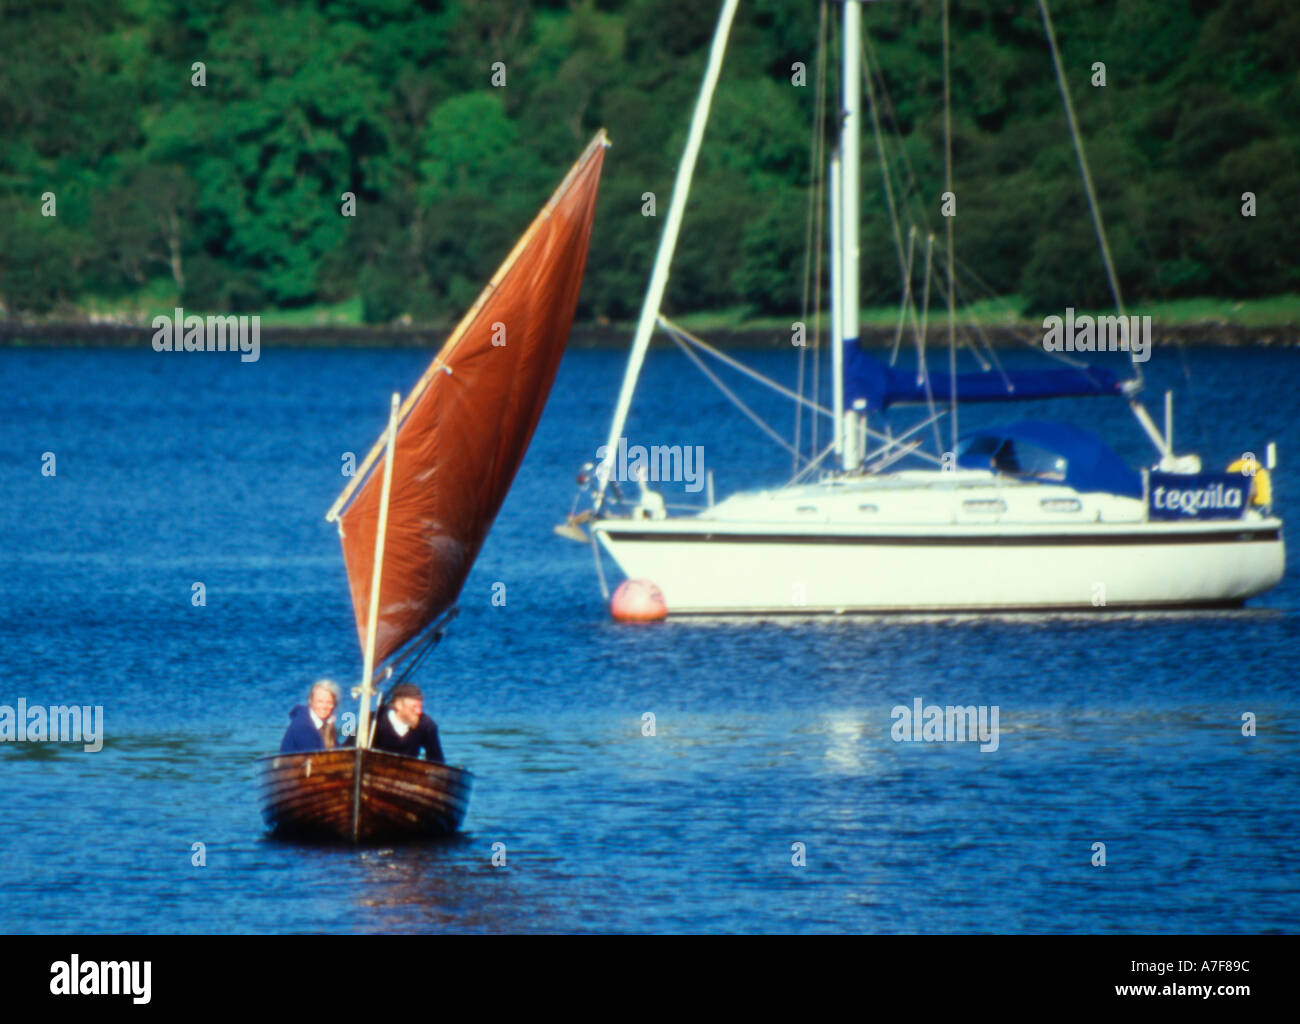 Traditional day sailing boat being sailed on Loch Craignish Clinker Lapstreak hull tan sails with lugsail rig Stock Photo